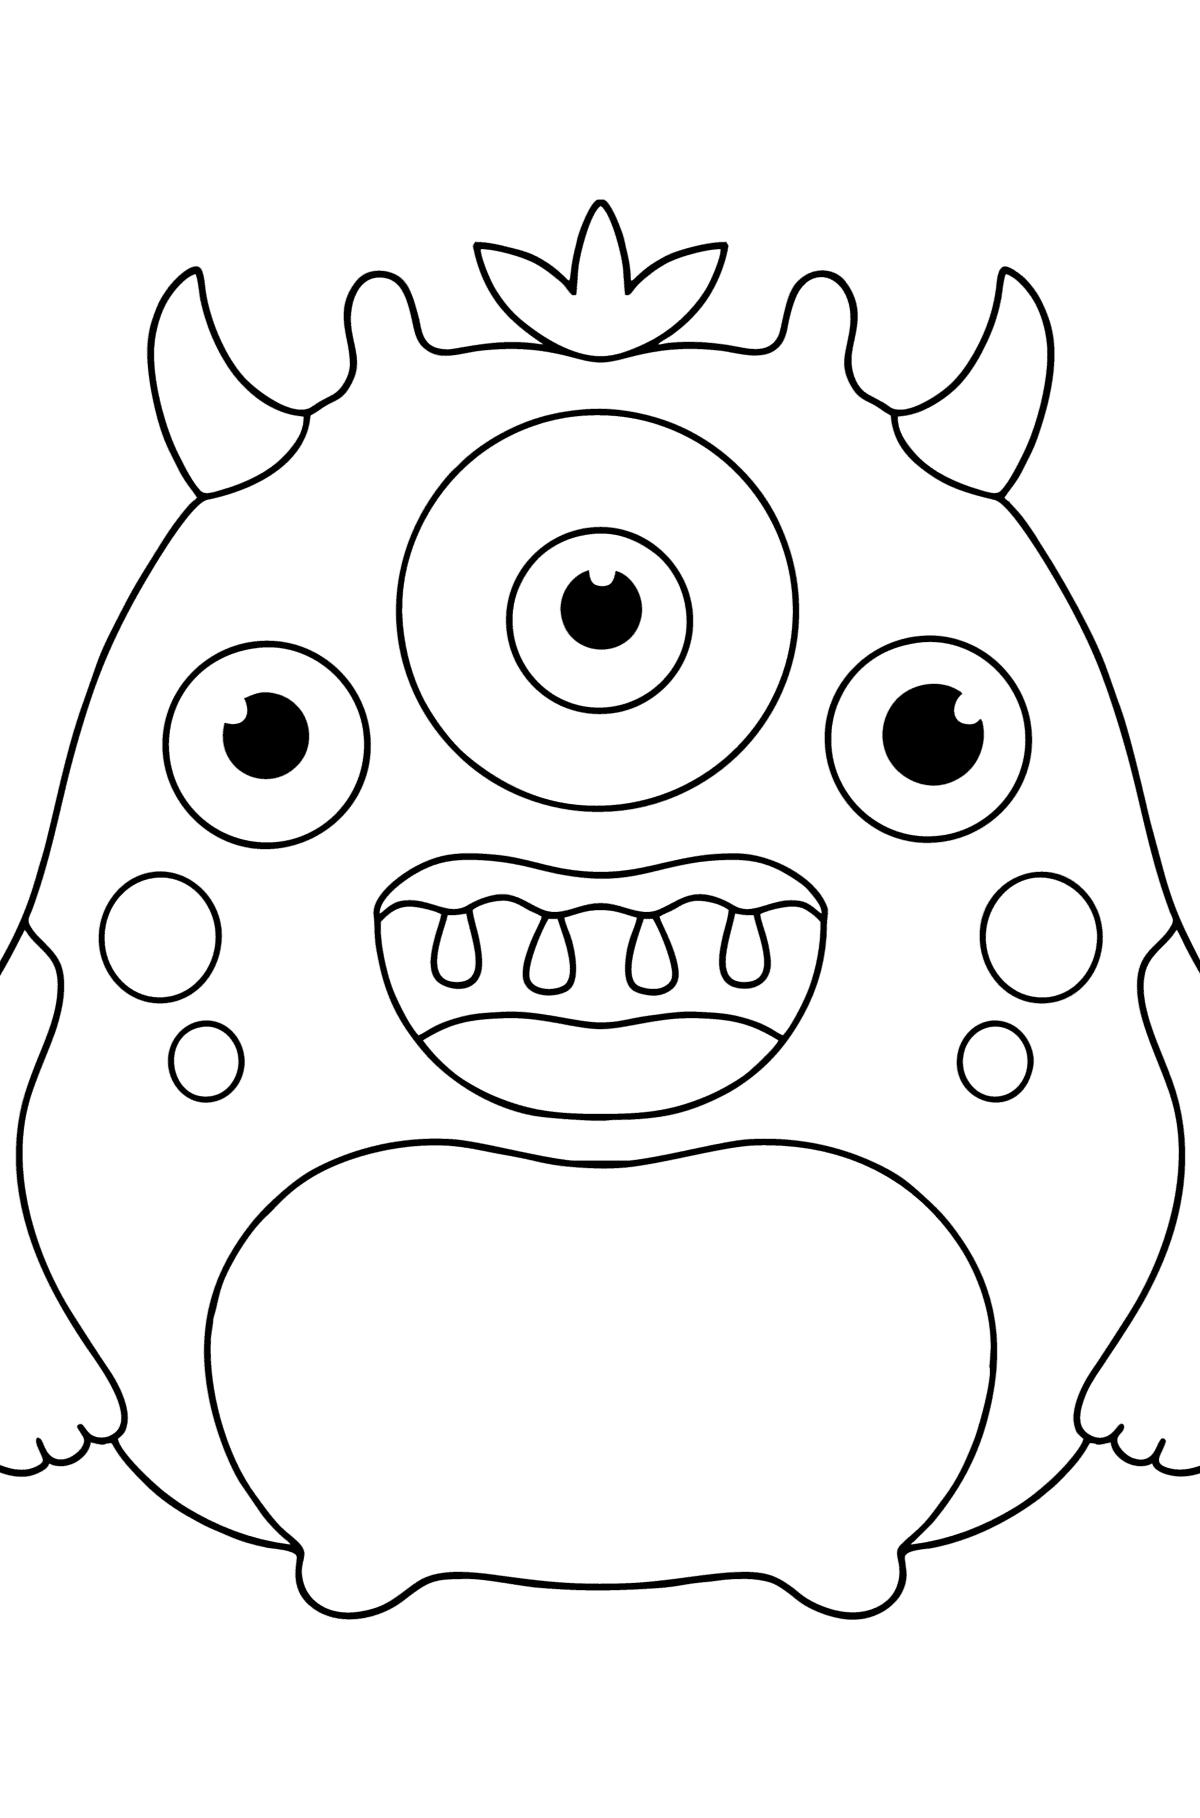 Good tomato сoloring page - Coloring Pages for Kids